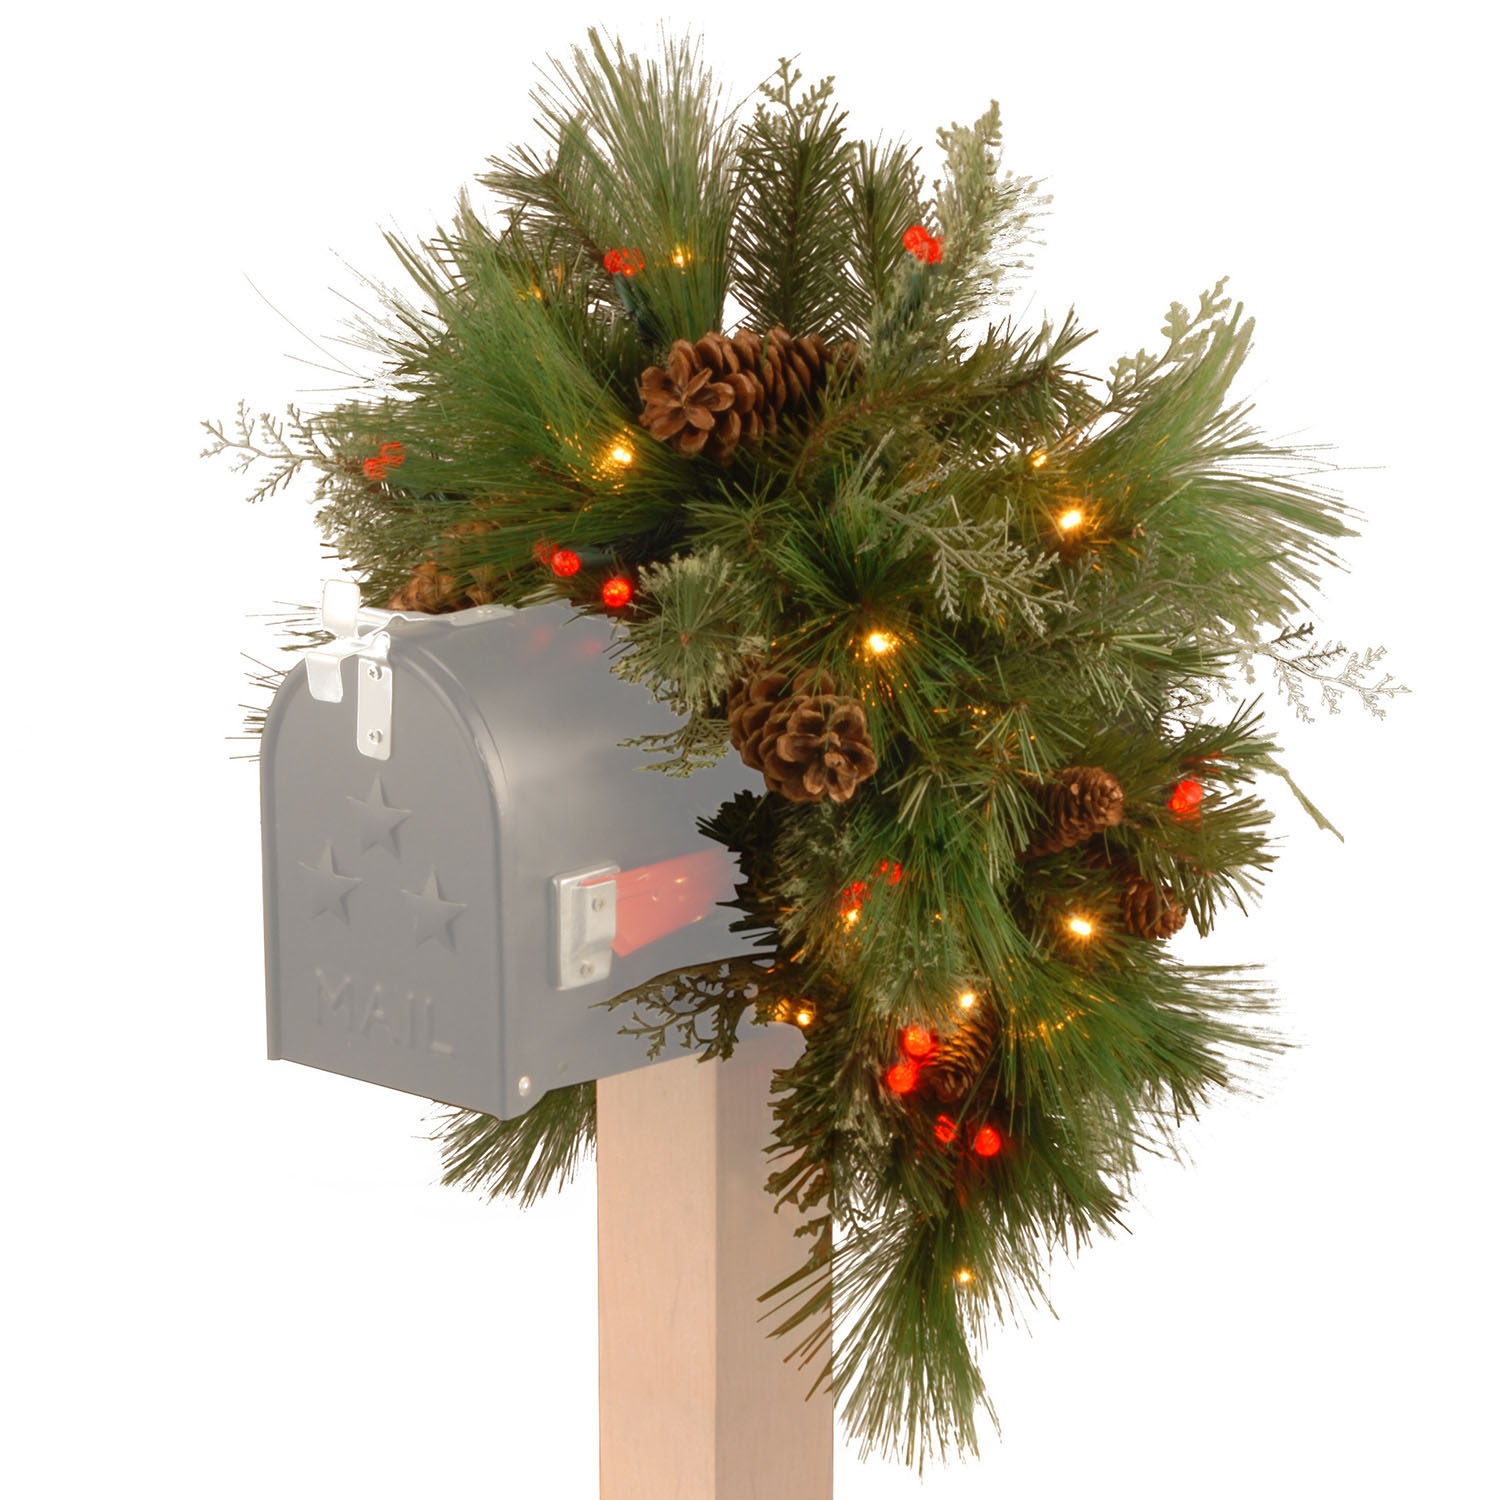 36 Inch White Pine Mailbox Swag: Battery Leds